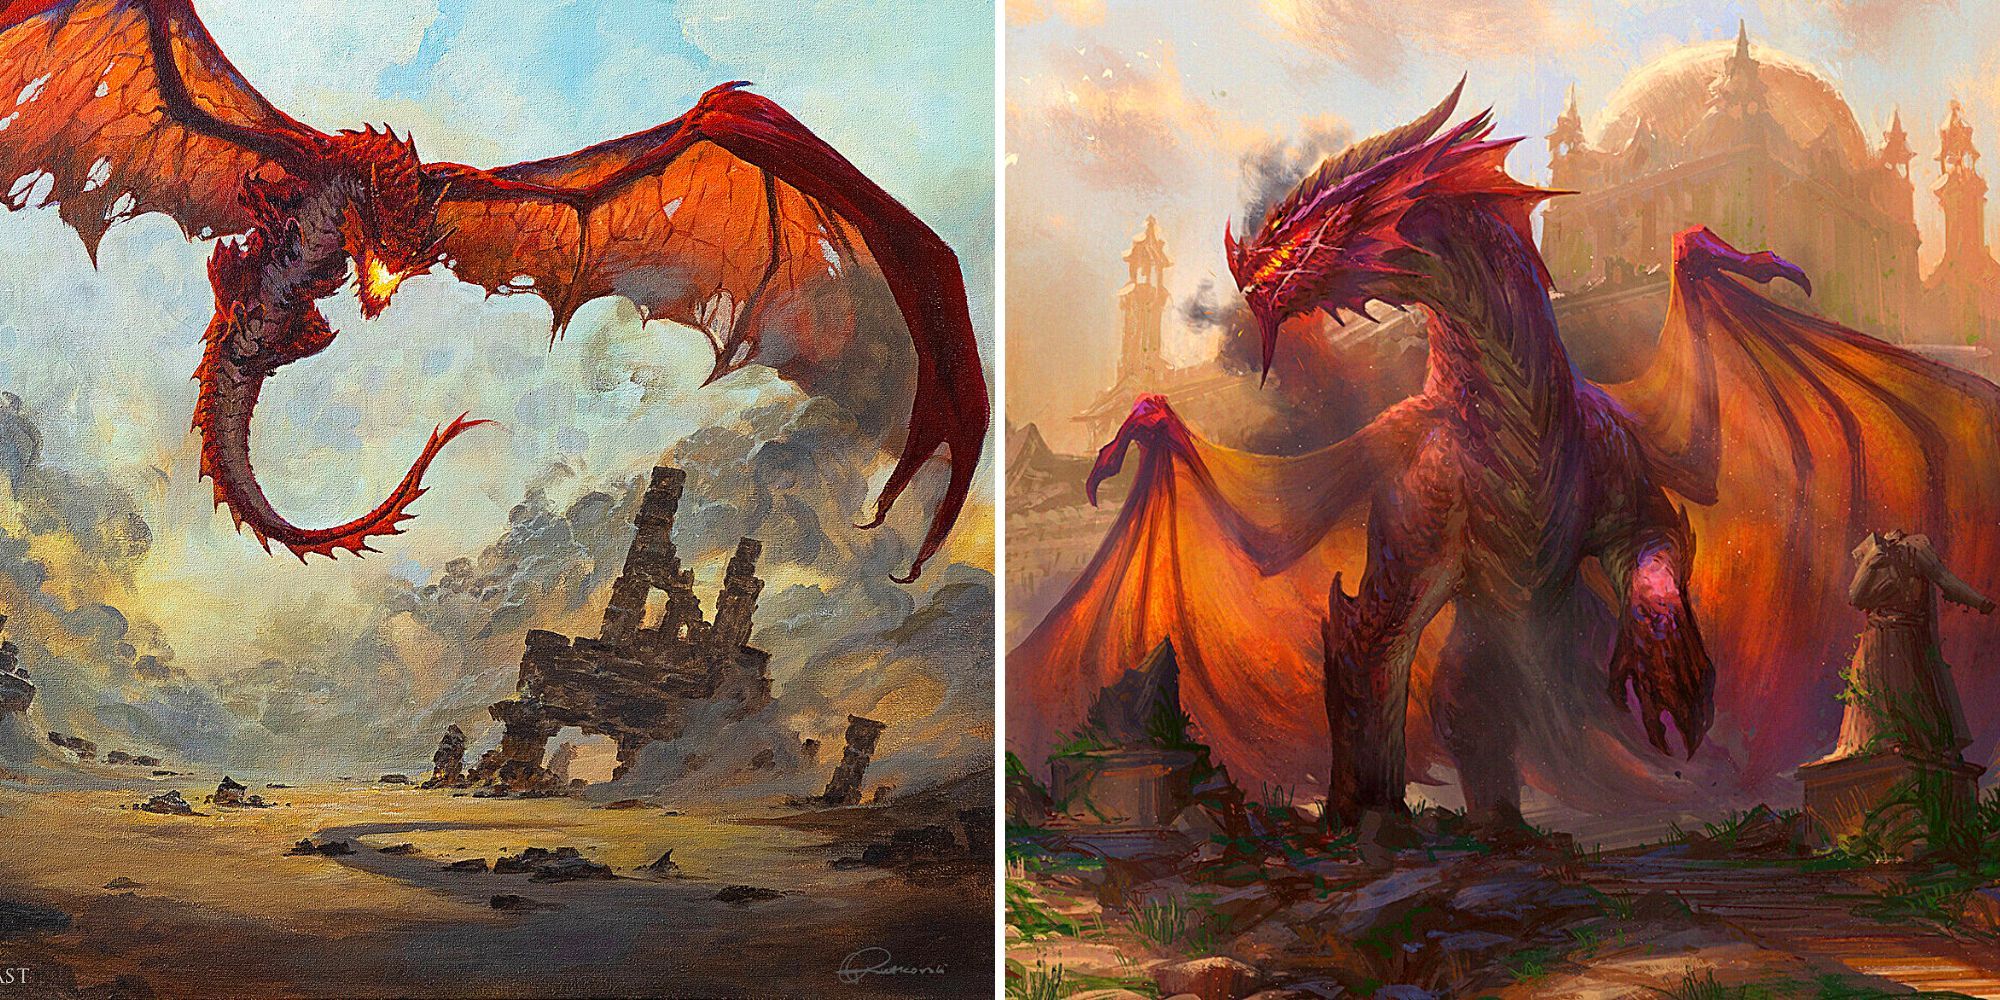 Red dragons face off battle